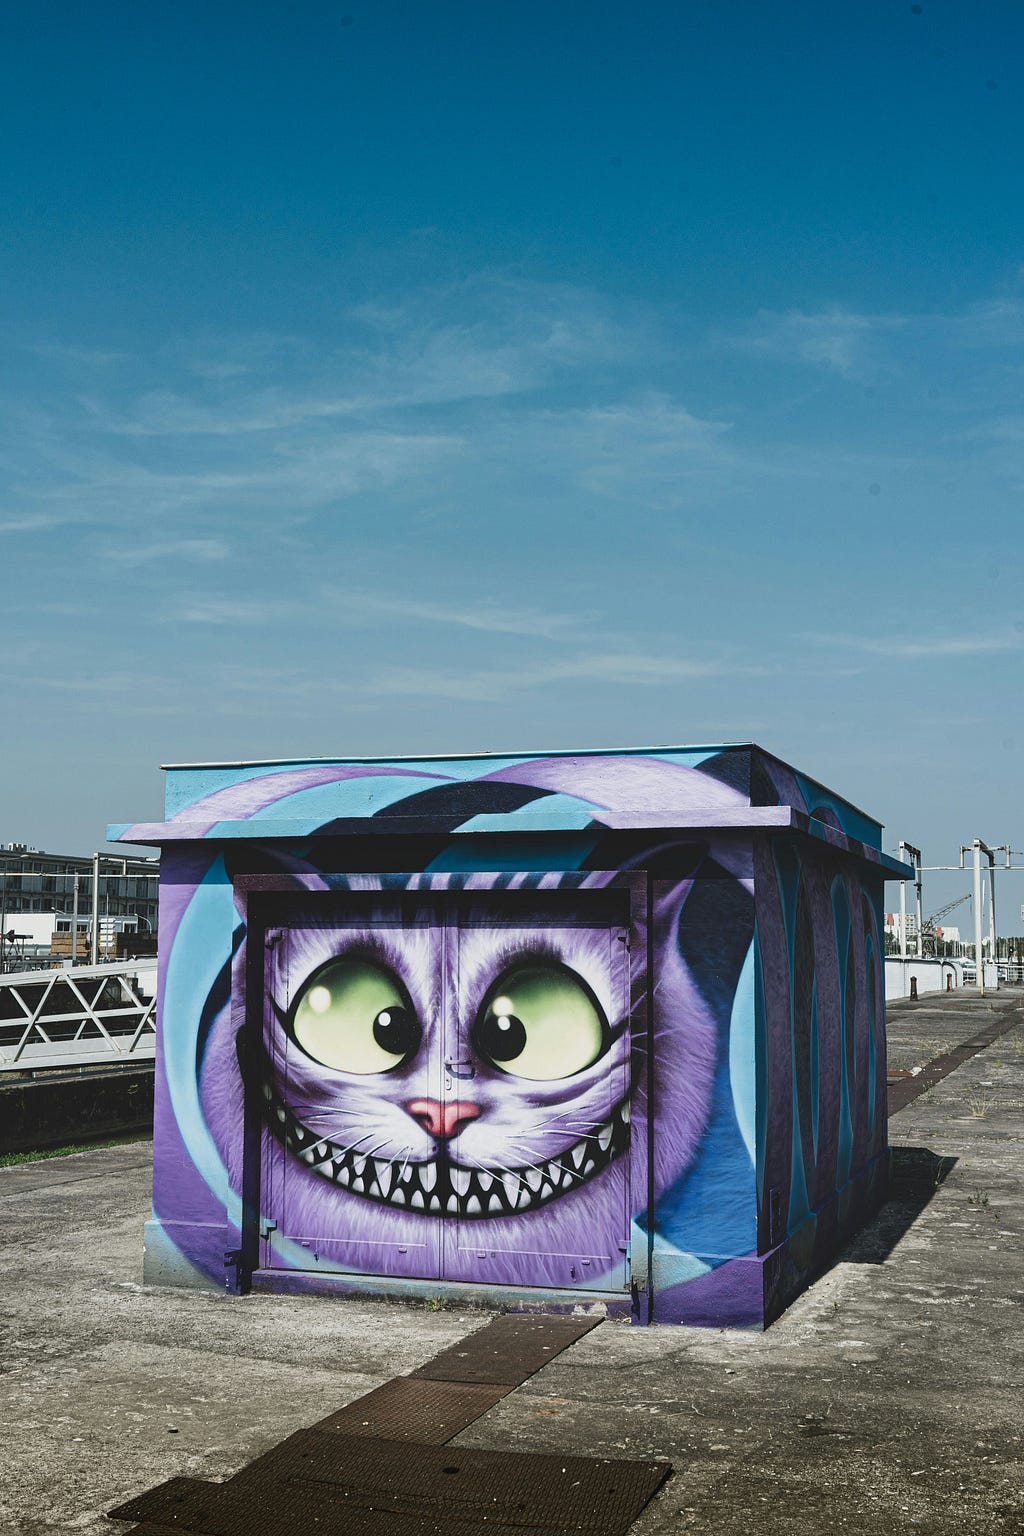 The image is of a small container building under a high blue sky at a siding, next to a white metal-railed bridge. The squat container is painted light blue. The face of the Cheshire cat with its wide smile, and eyes squinted at the bridge of its nose, is painted on the width of the side facing the viewer.